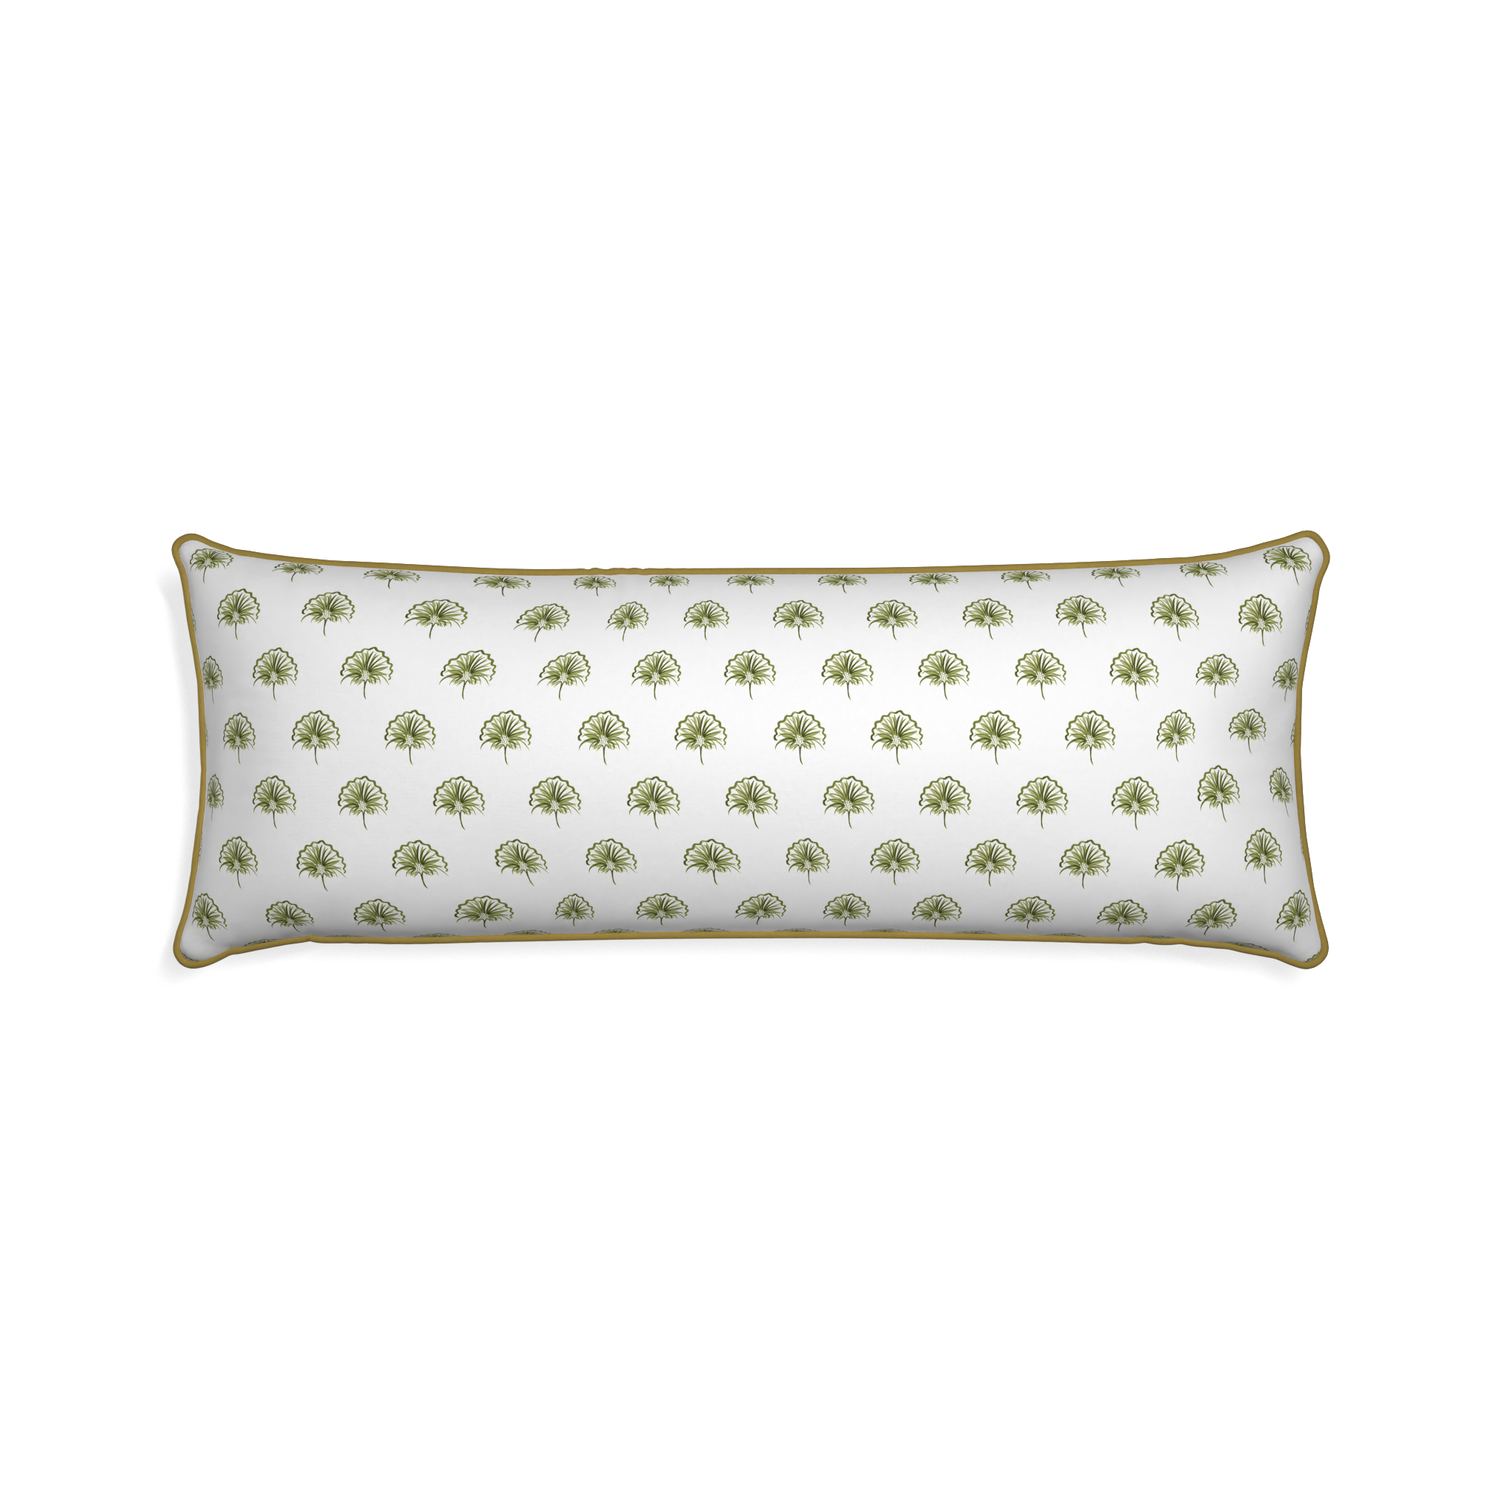 Xl-lumbar penelope moss custom green floralpillow with c piping on white background